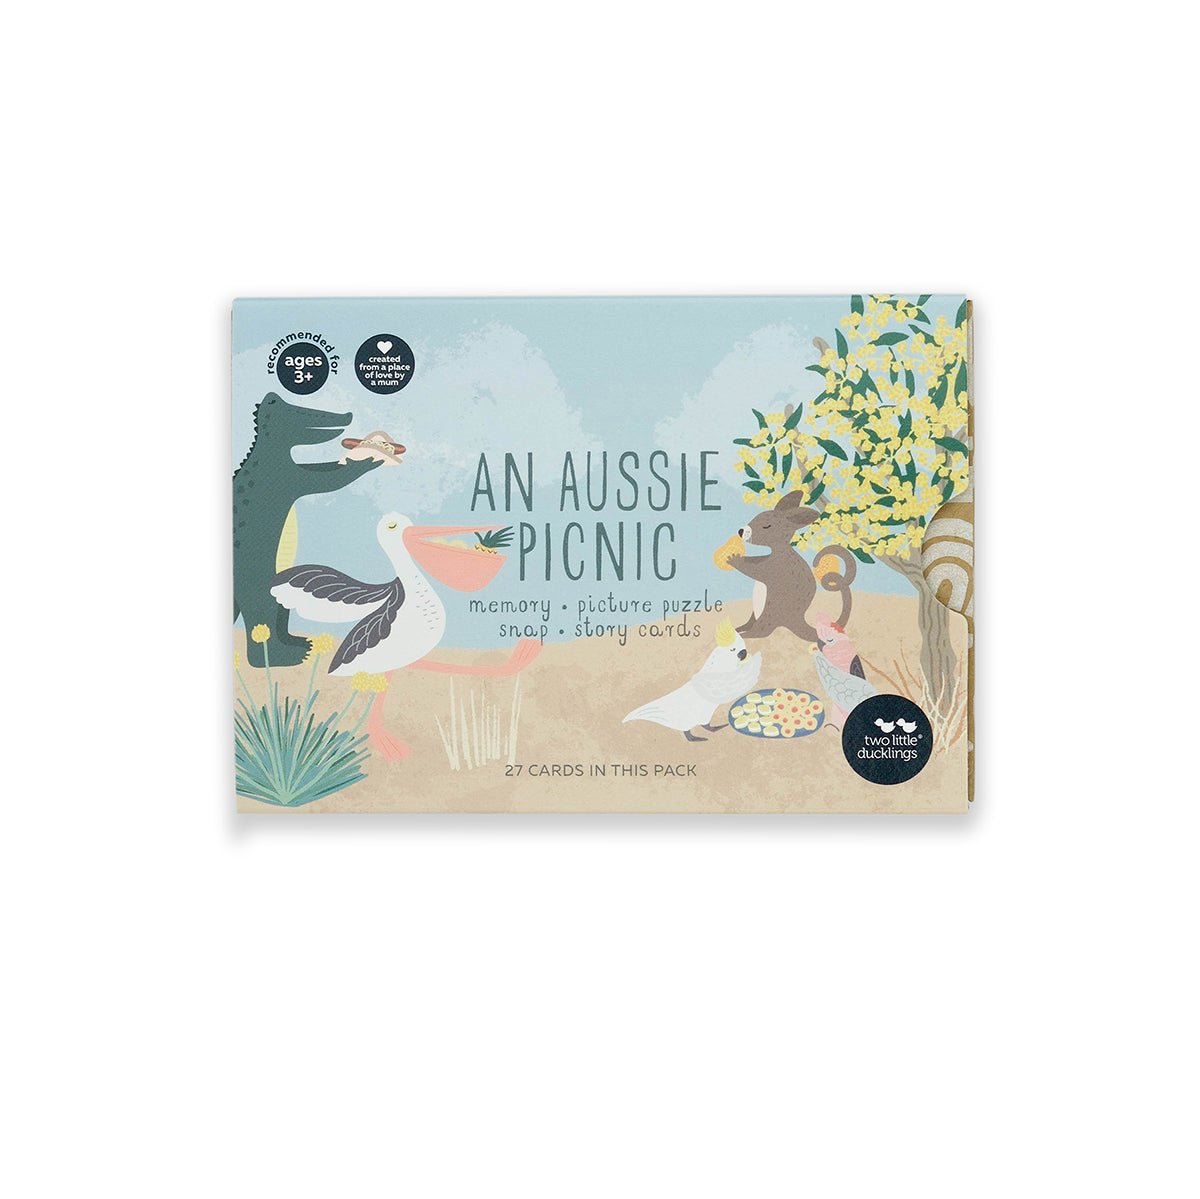 An Aussie Picnic Memory Game | Two Little Ducklings